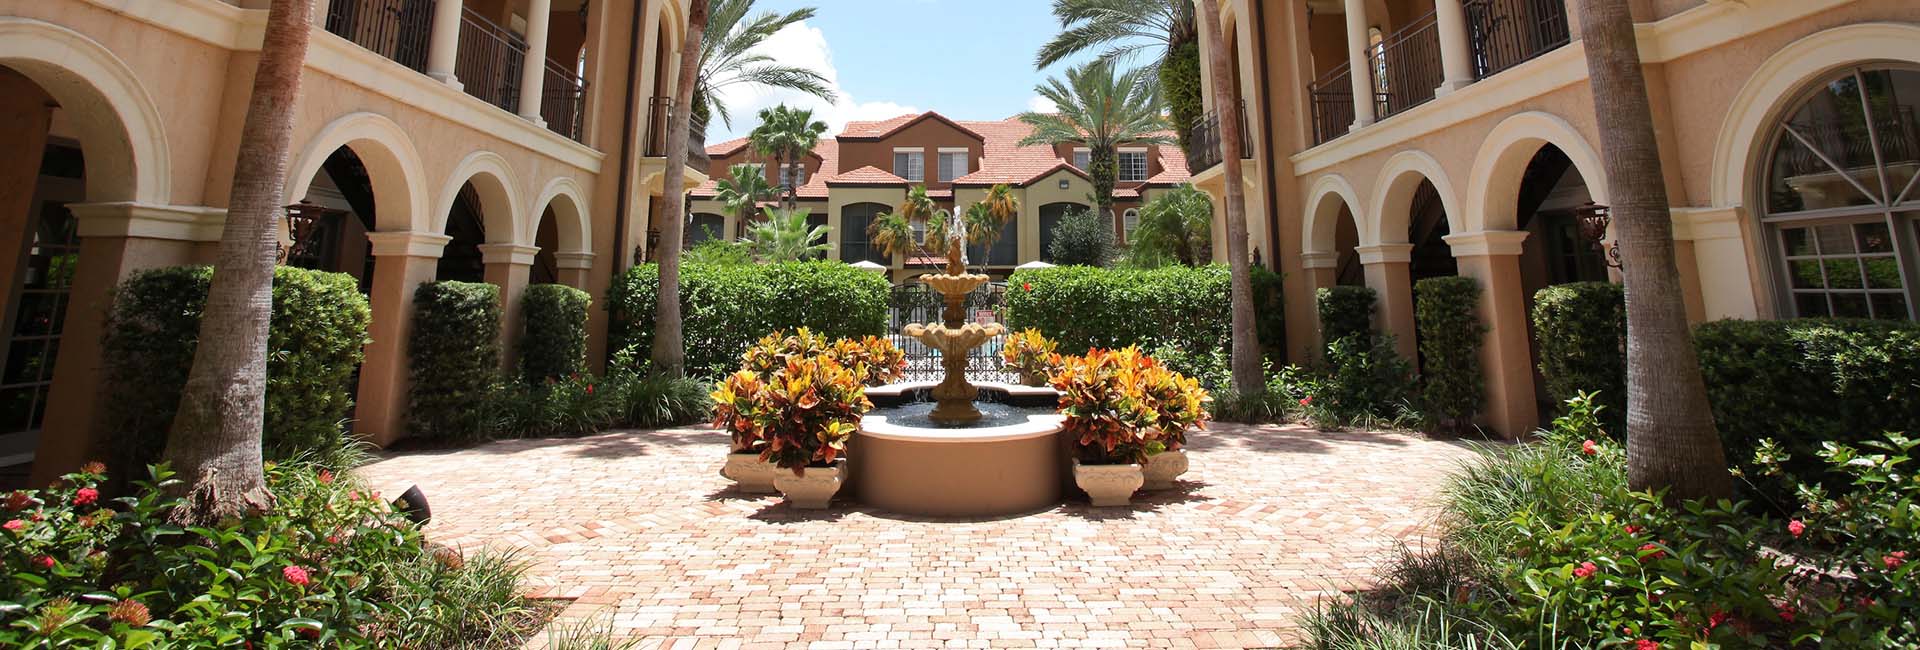 Tampa Bay landscaping services